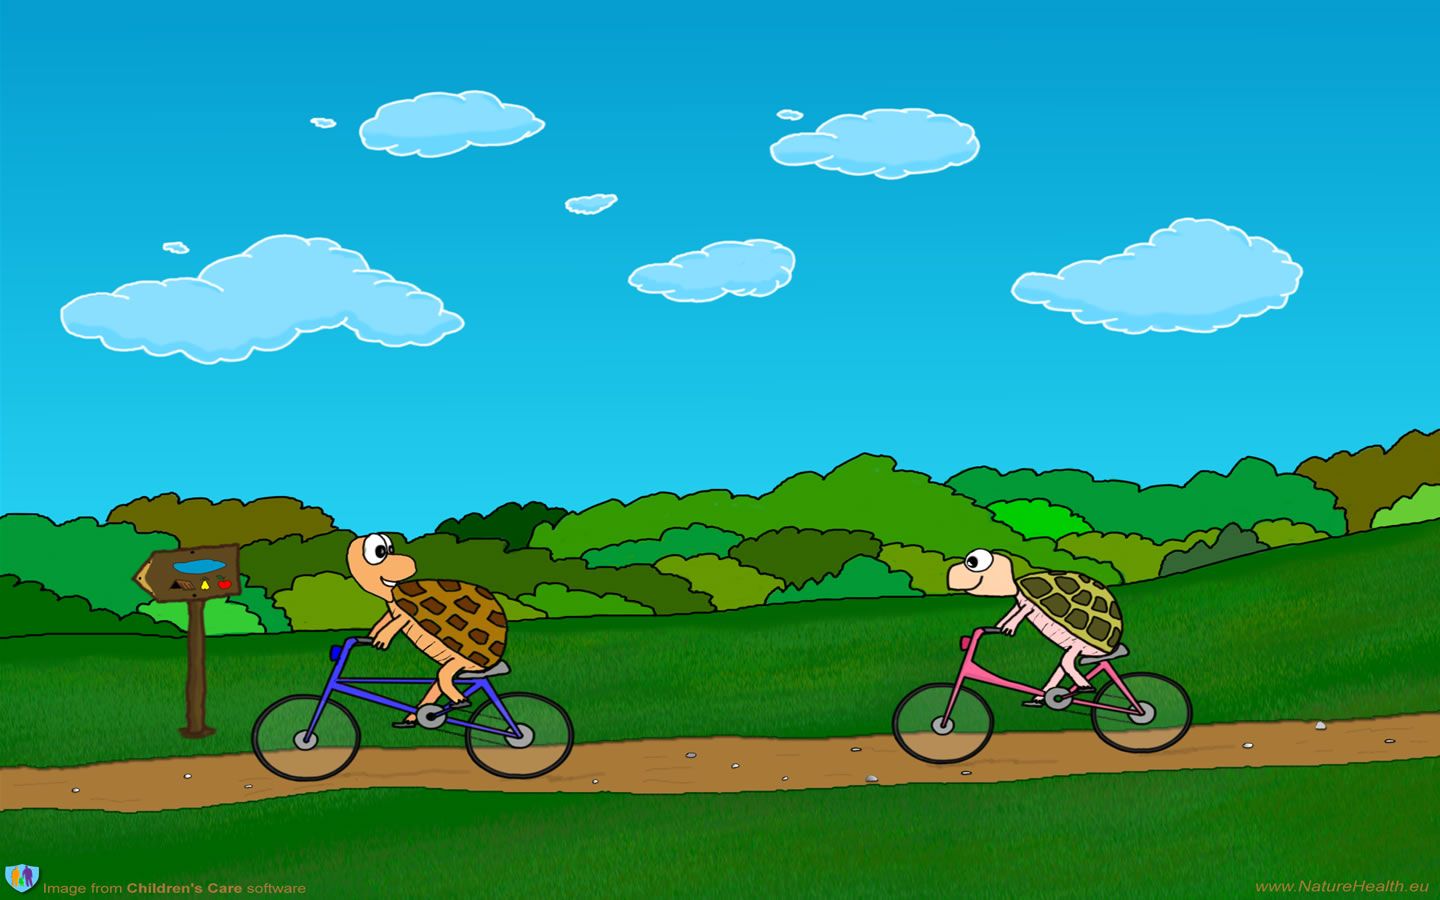 turtles on bikes Wallpaper and Background Imagex900